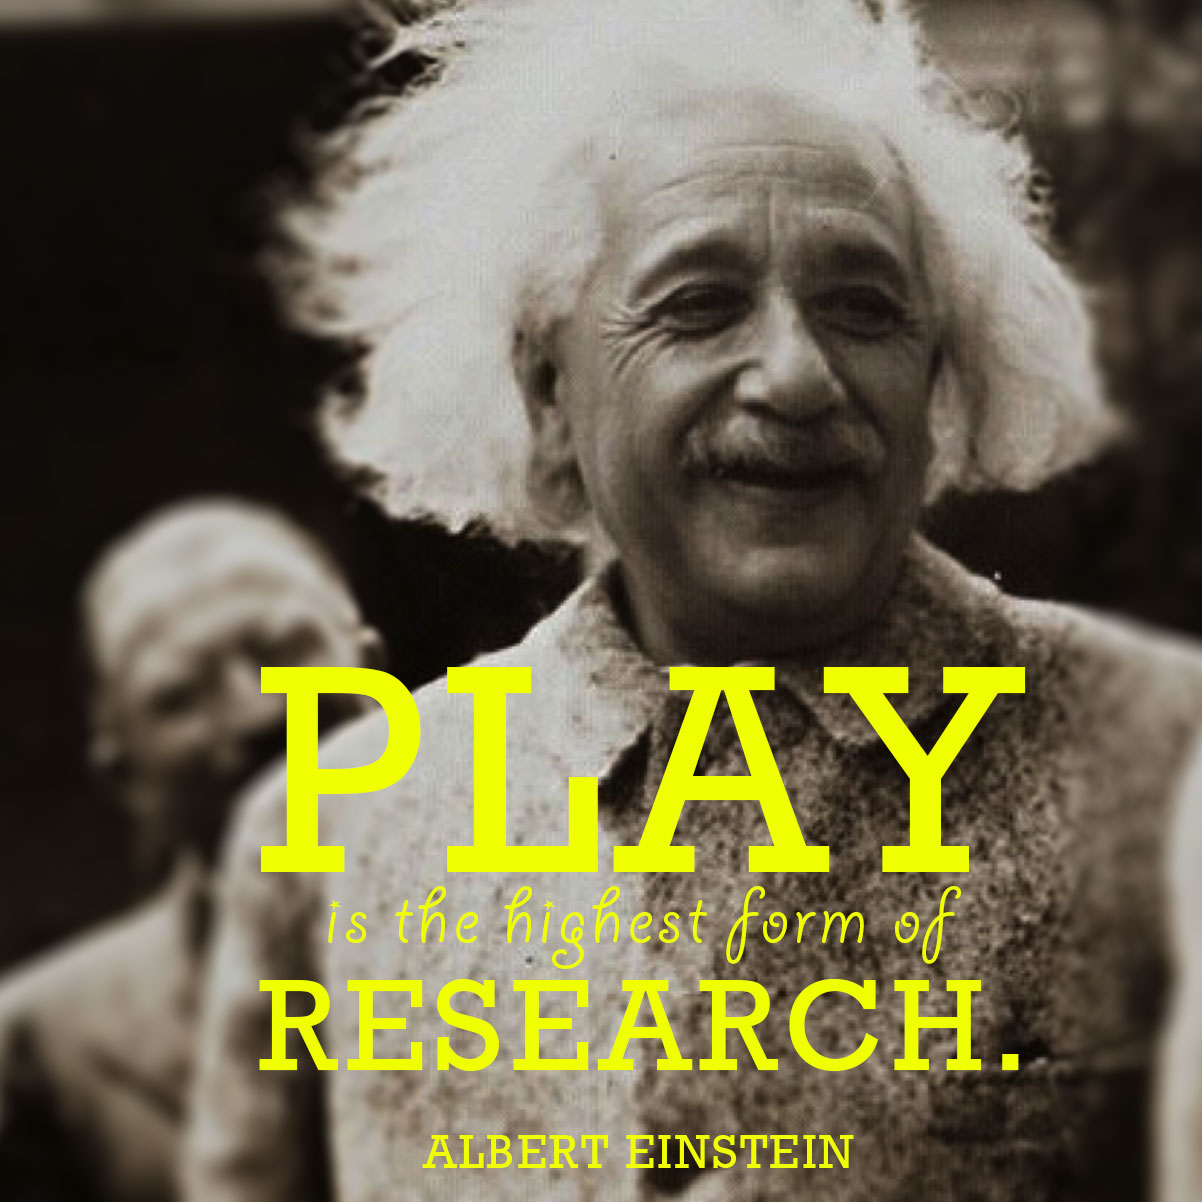 Play is the highest form of research. Albert Einstein